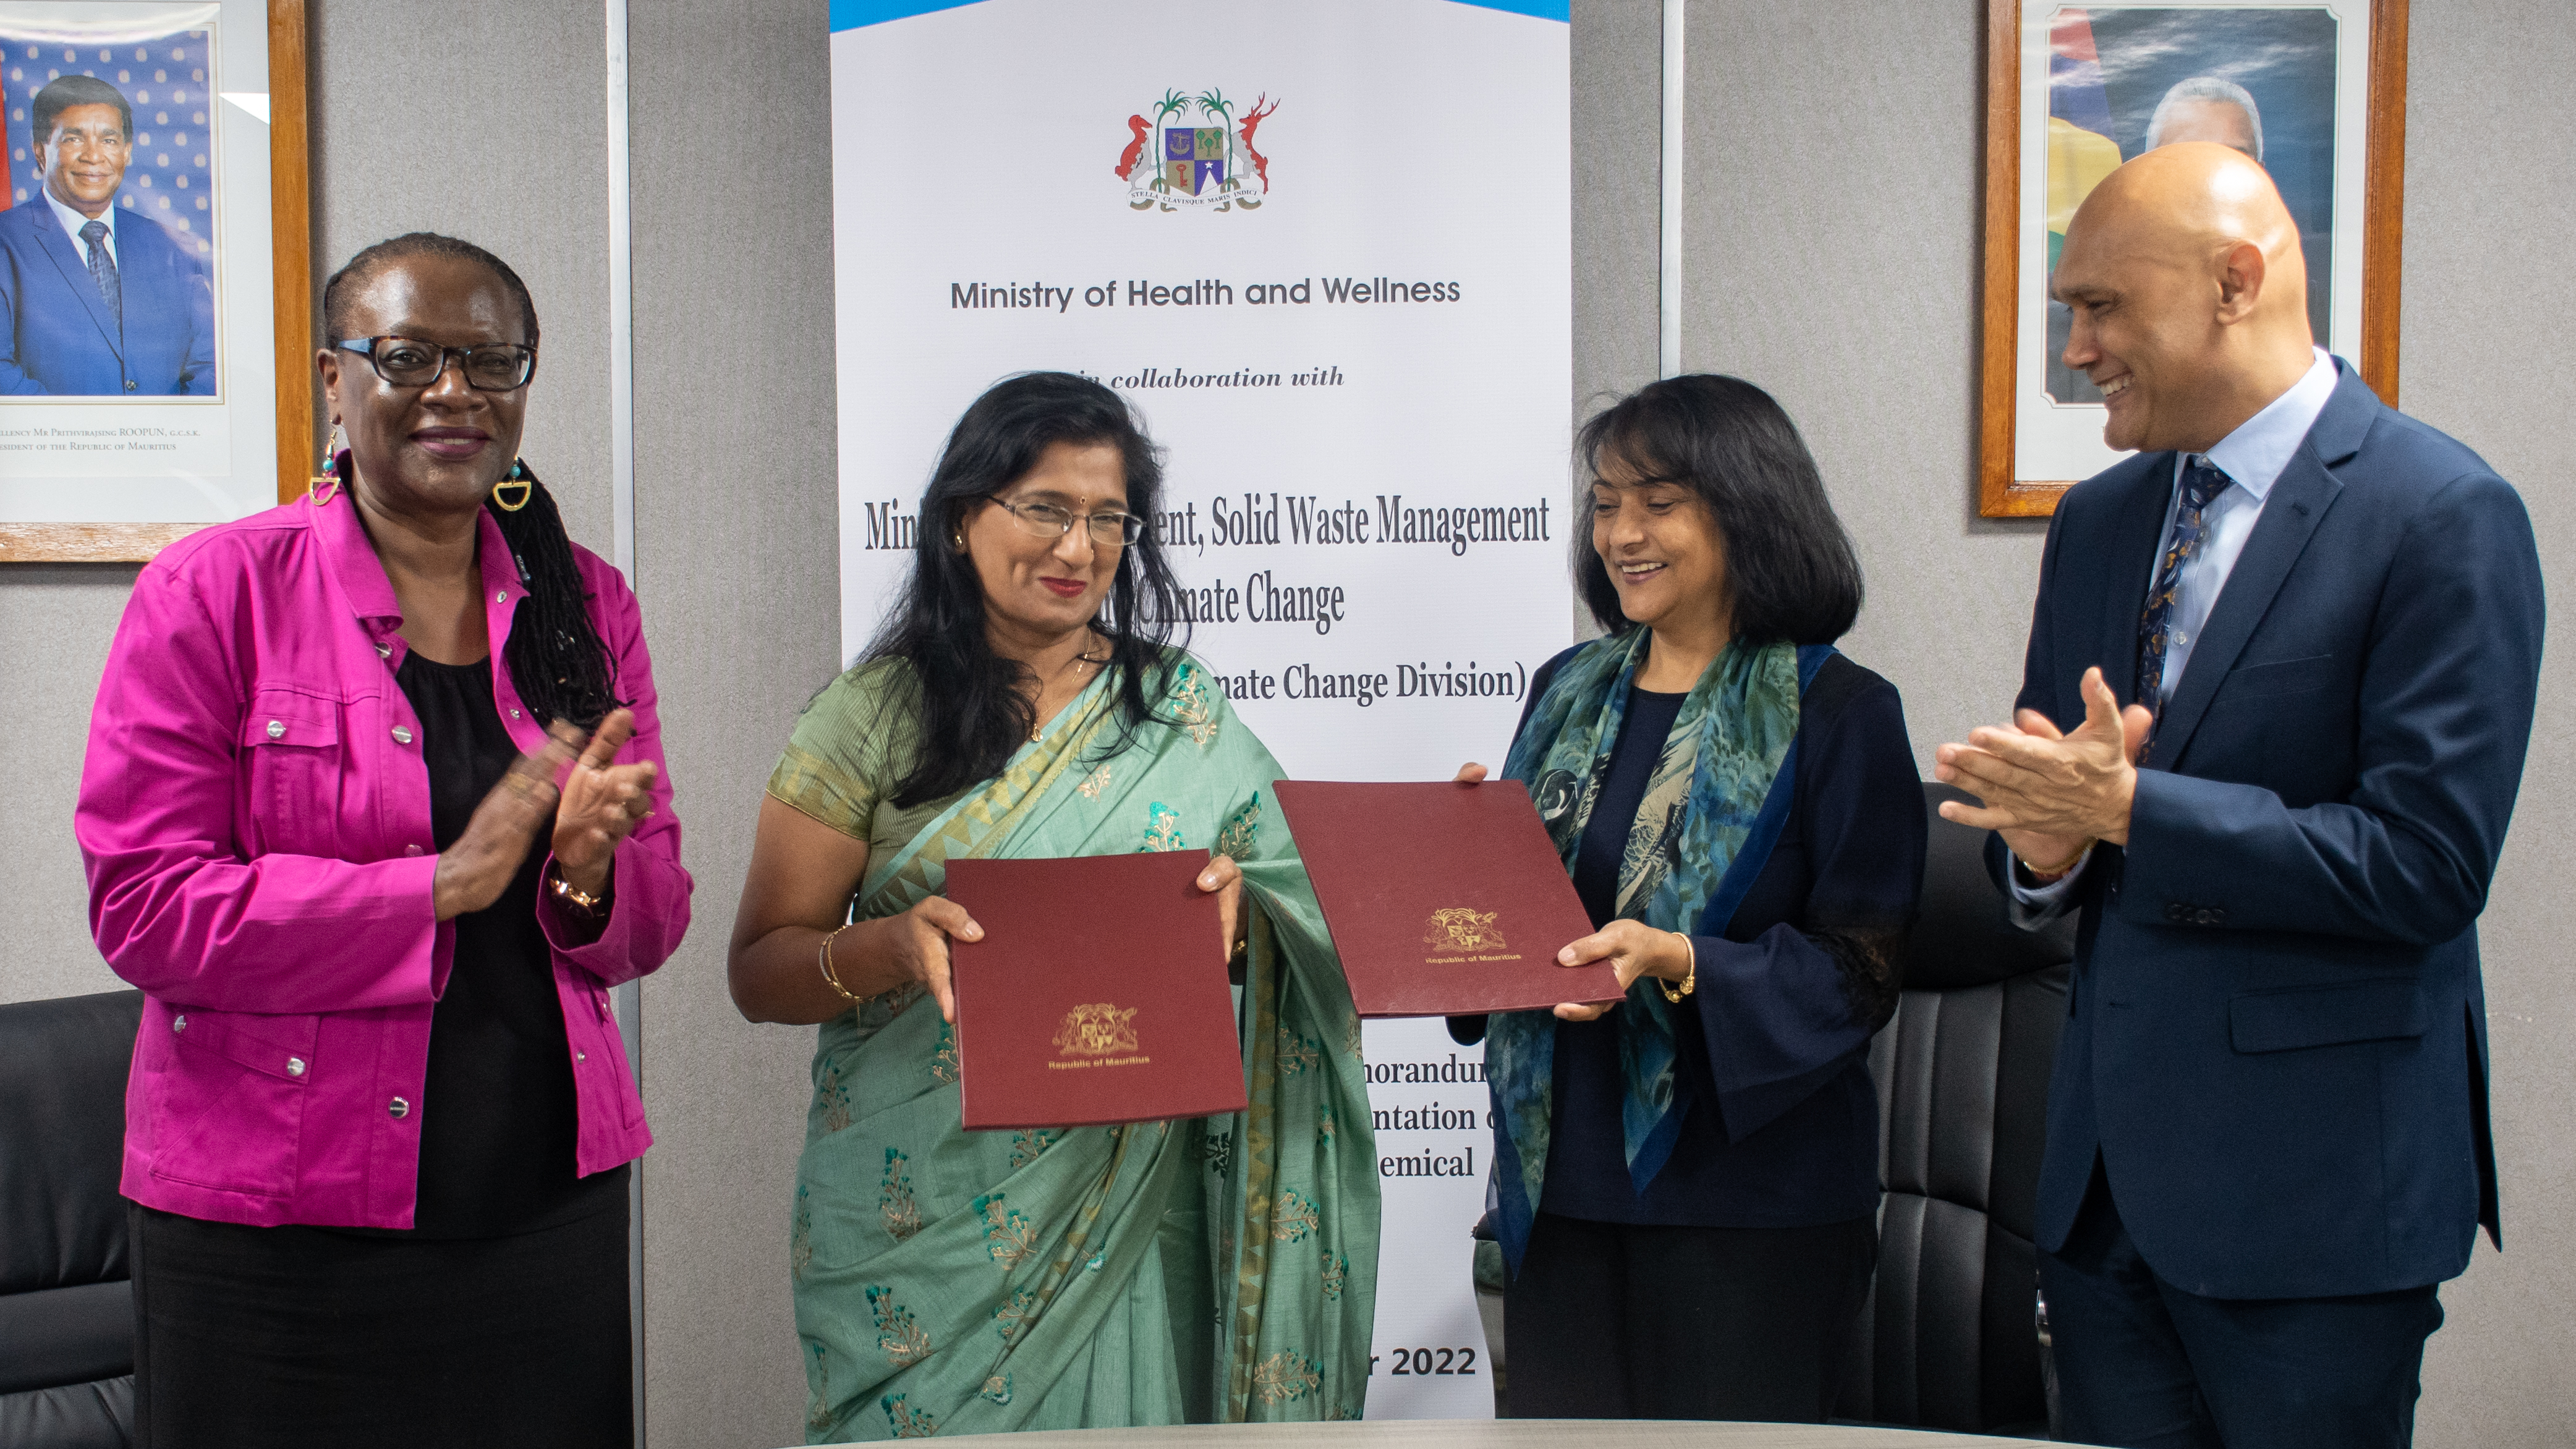 Mauritius: Ministry of Health and Wellness Partners with UNDP to Set Up a National Healthcare Waste Disposal Facility